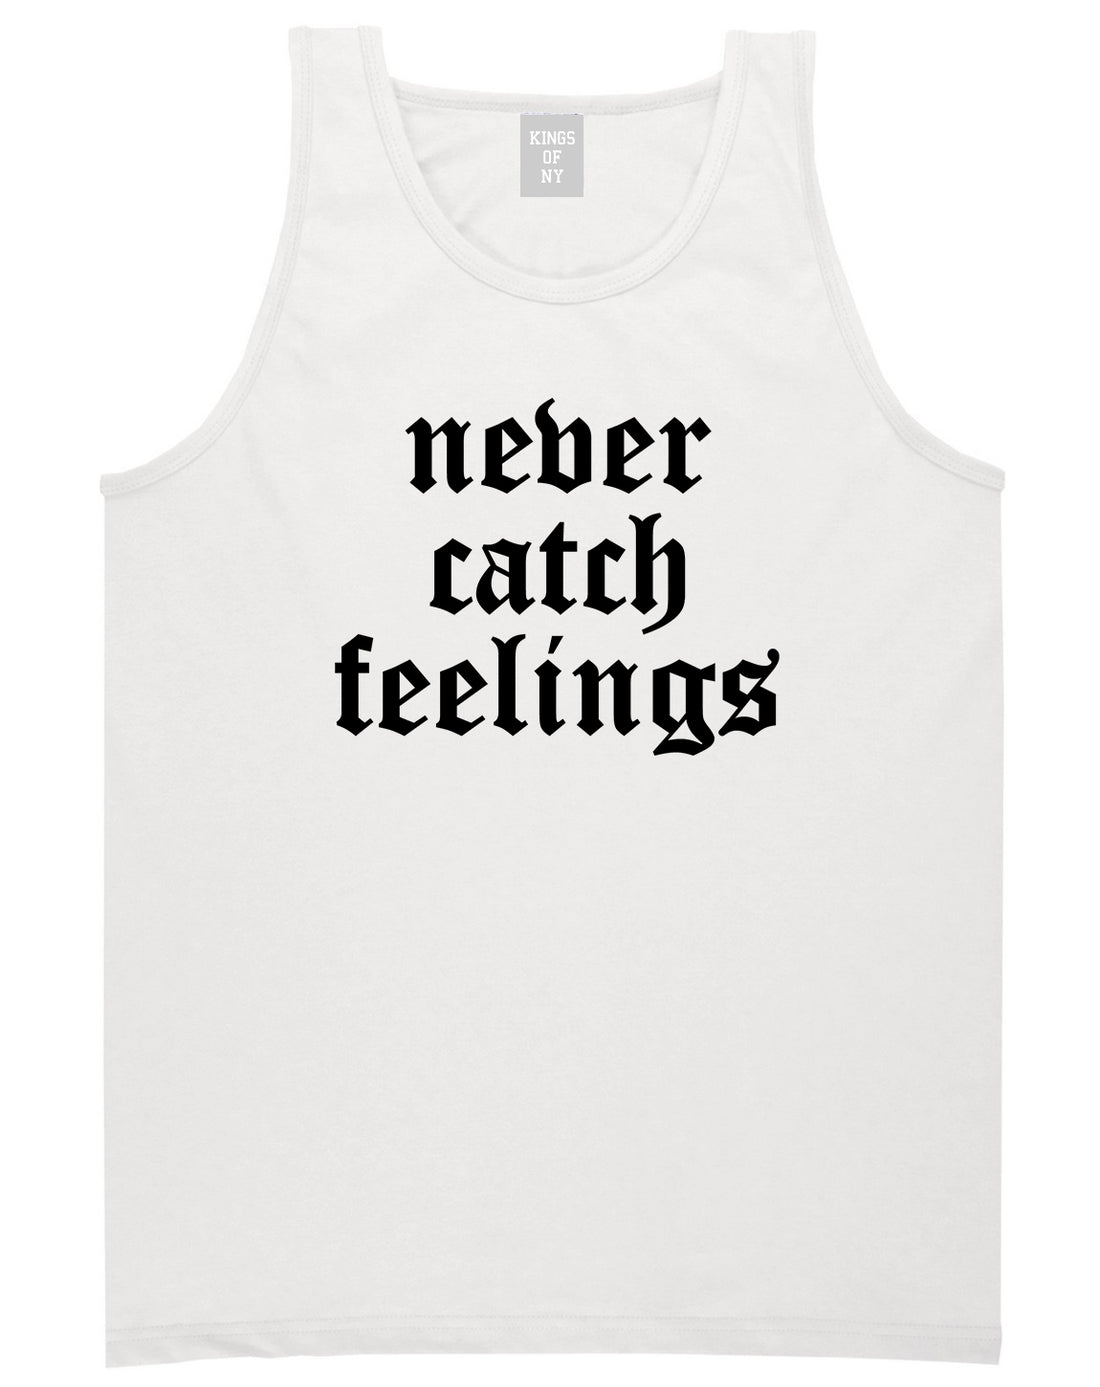 Never Catch Feelings Mens Tank Top Shirt White by Kings Of NY